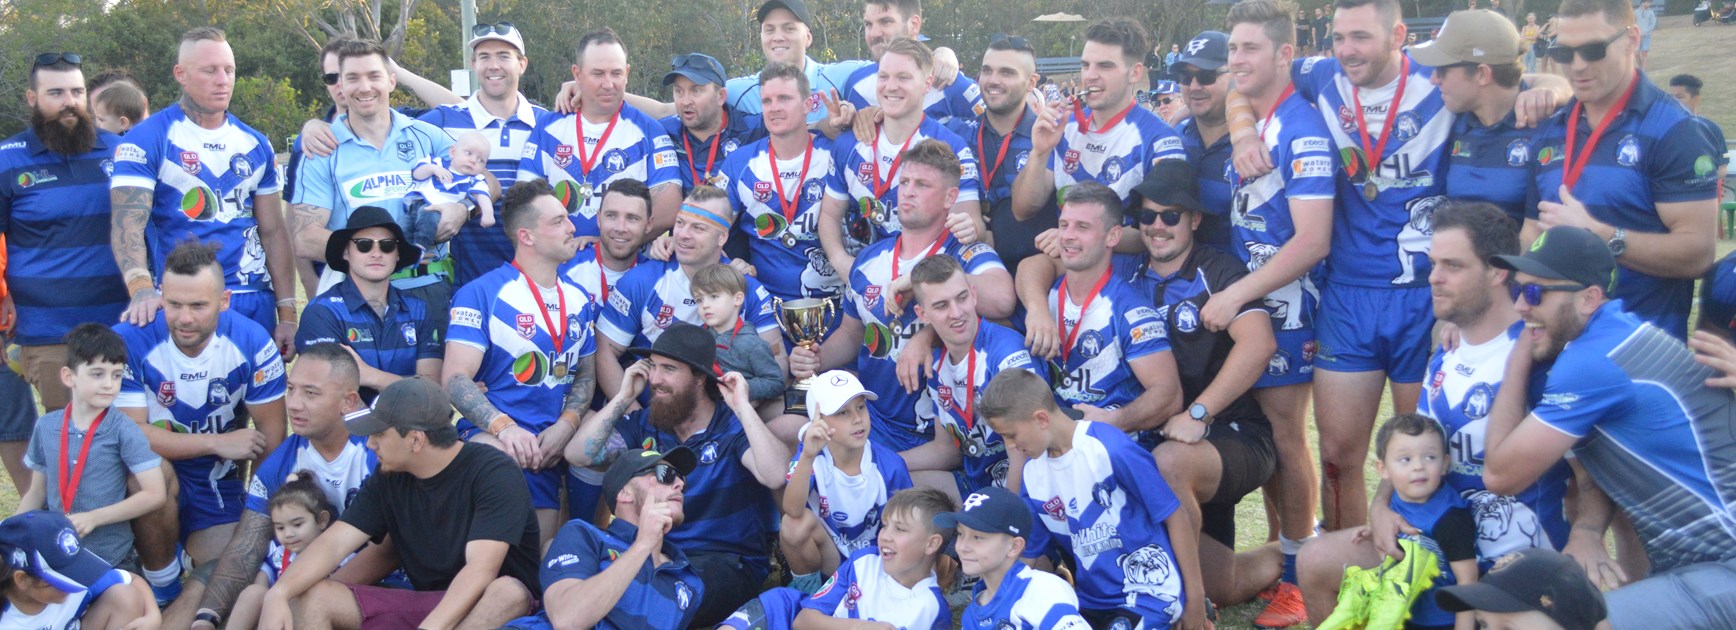 Southside sweep Rugby League Brisbane finals